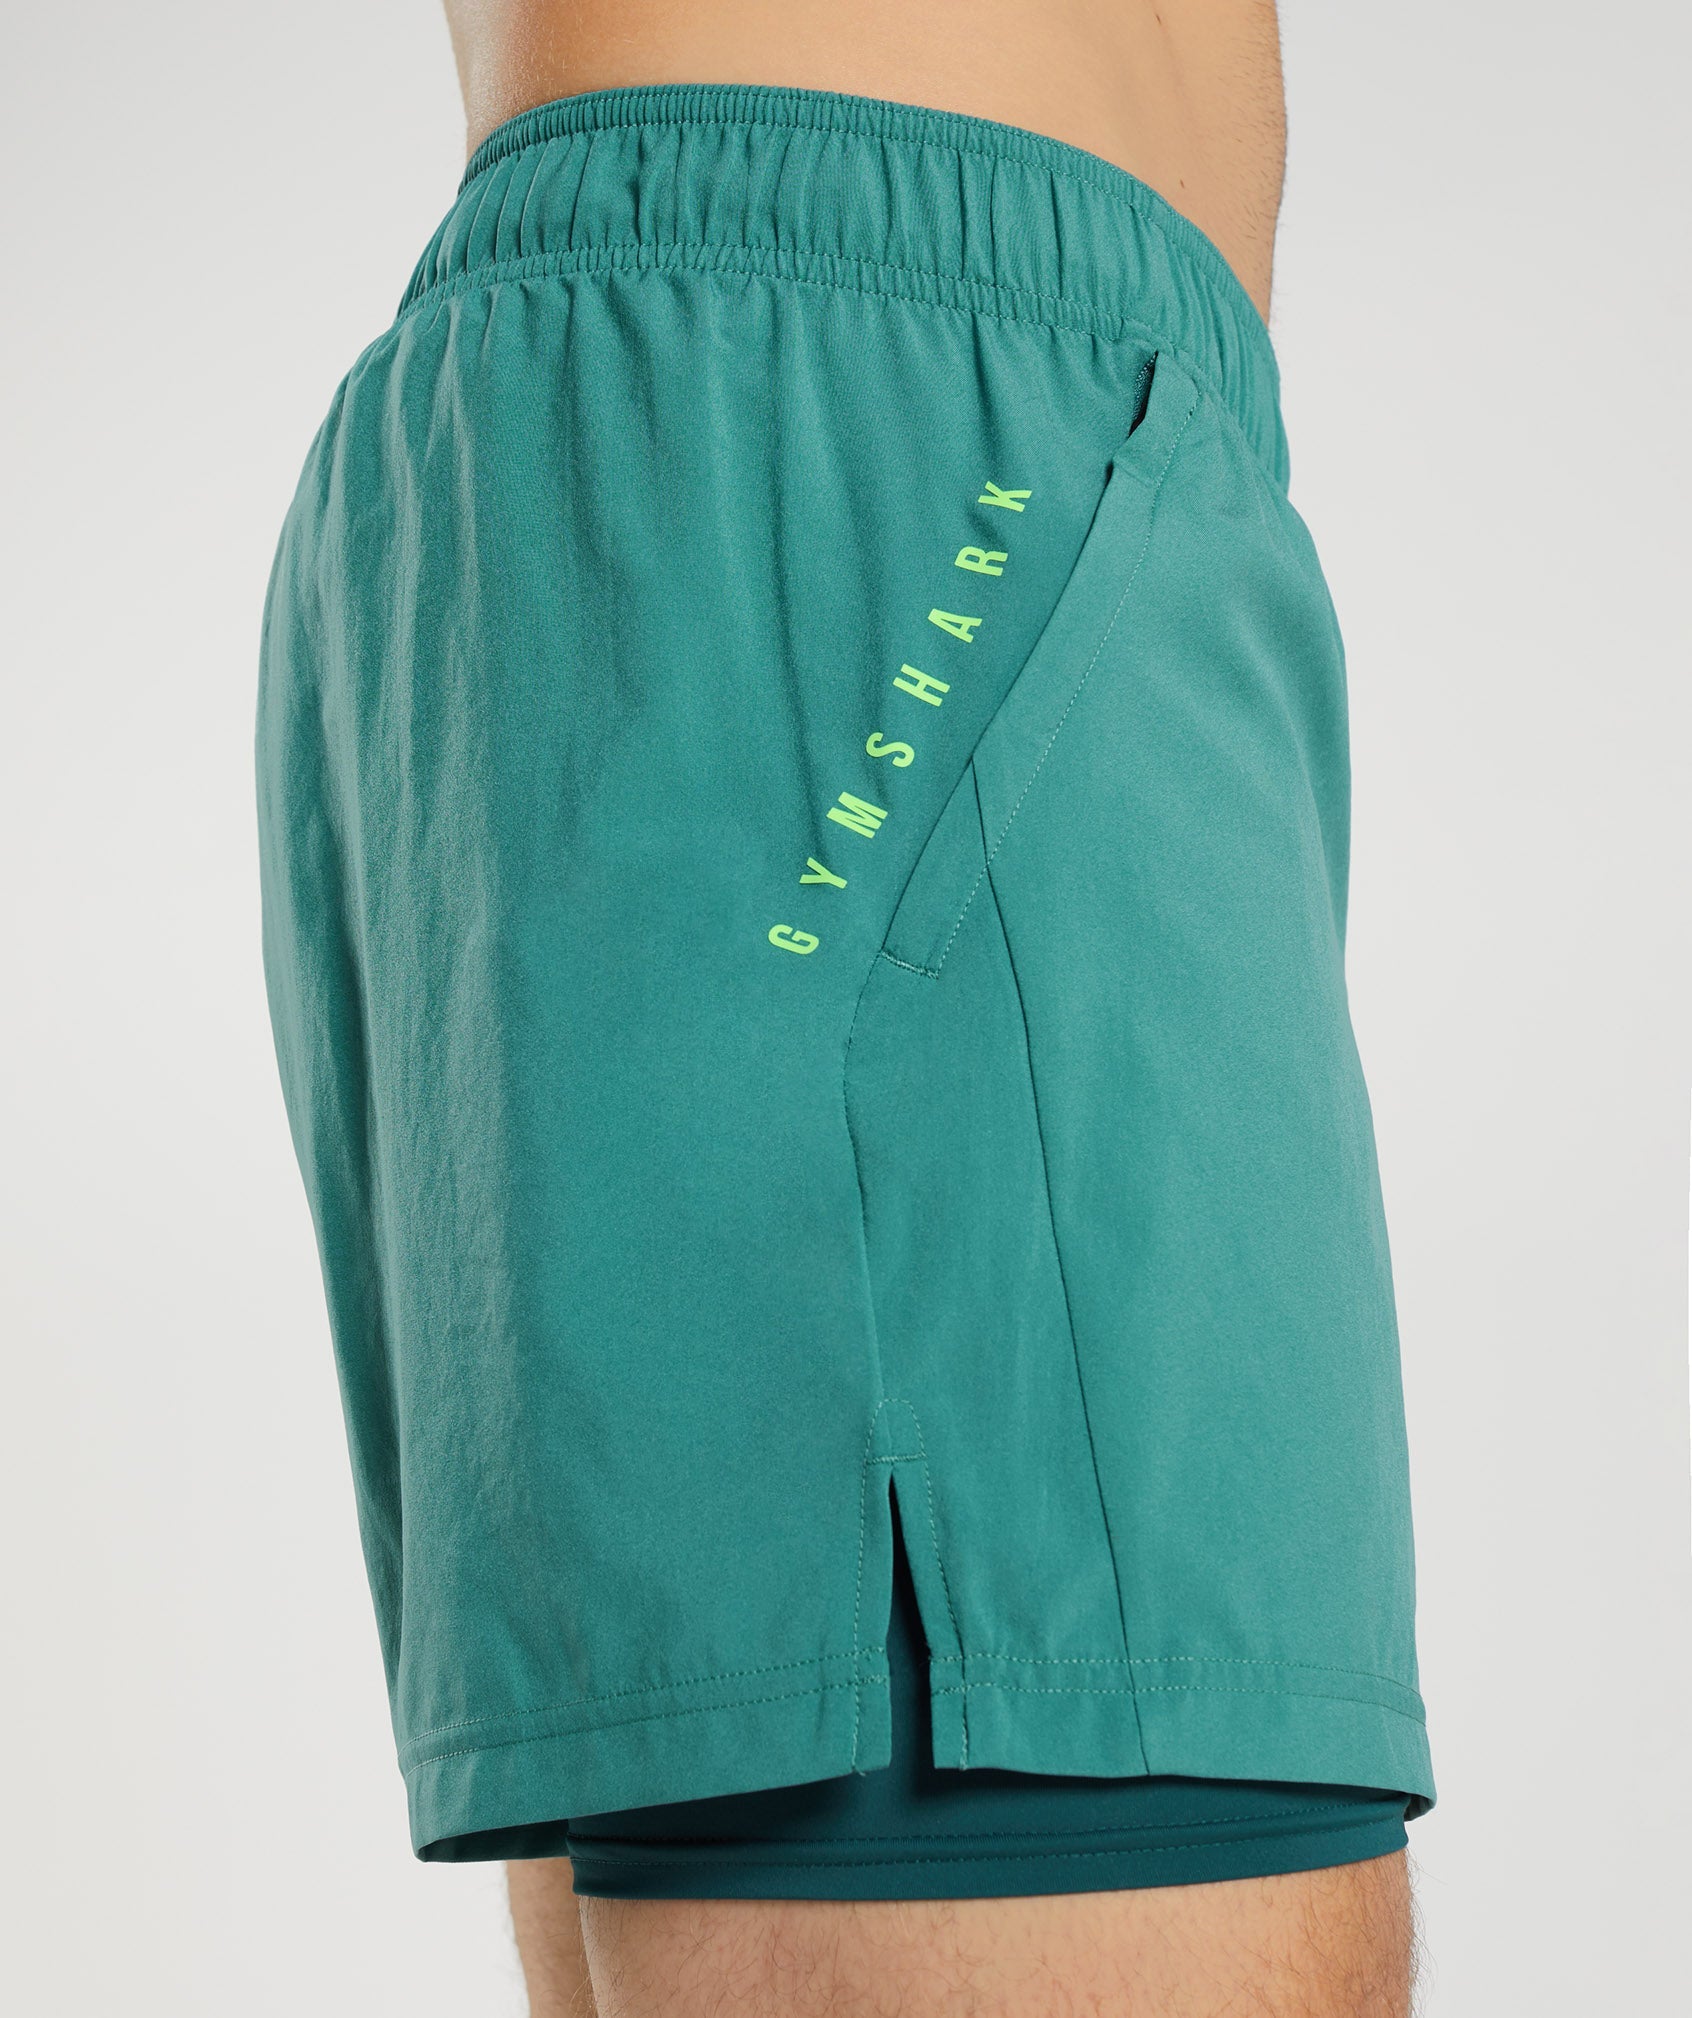 Sport 5" 2 In 1 Shorts in Slate Blue/Winter Teal - view 5